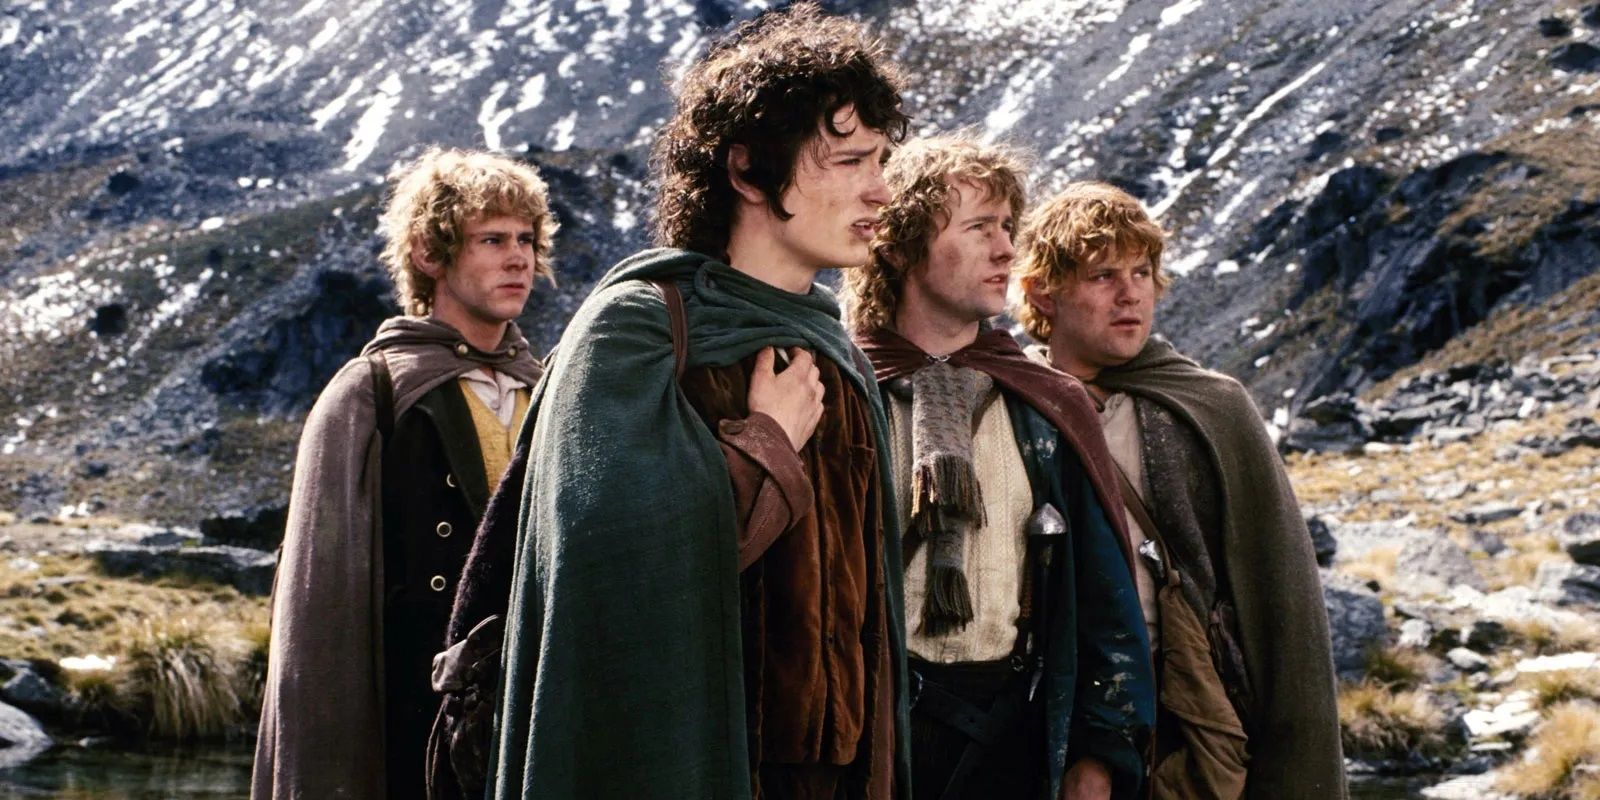 Frodo and the Hobbits from The Fellowship of the Ring